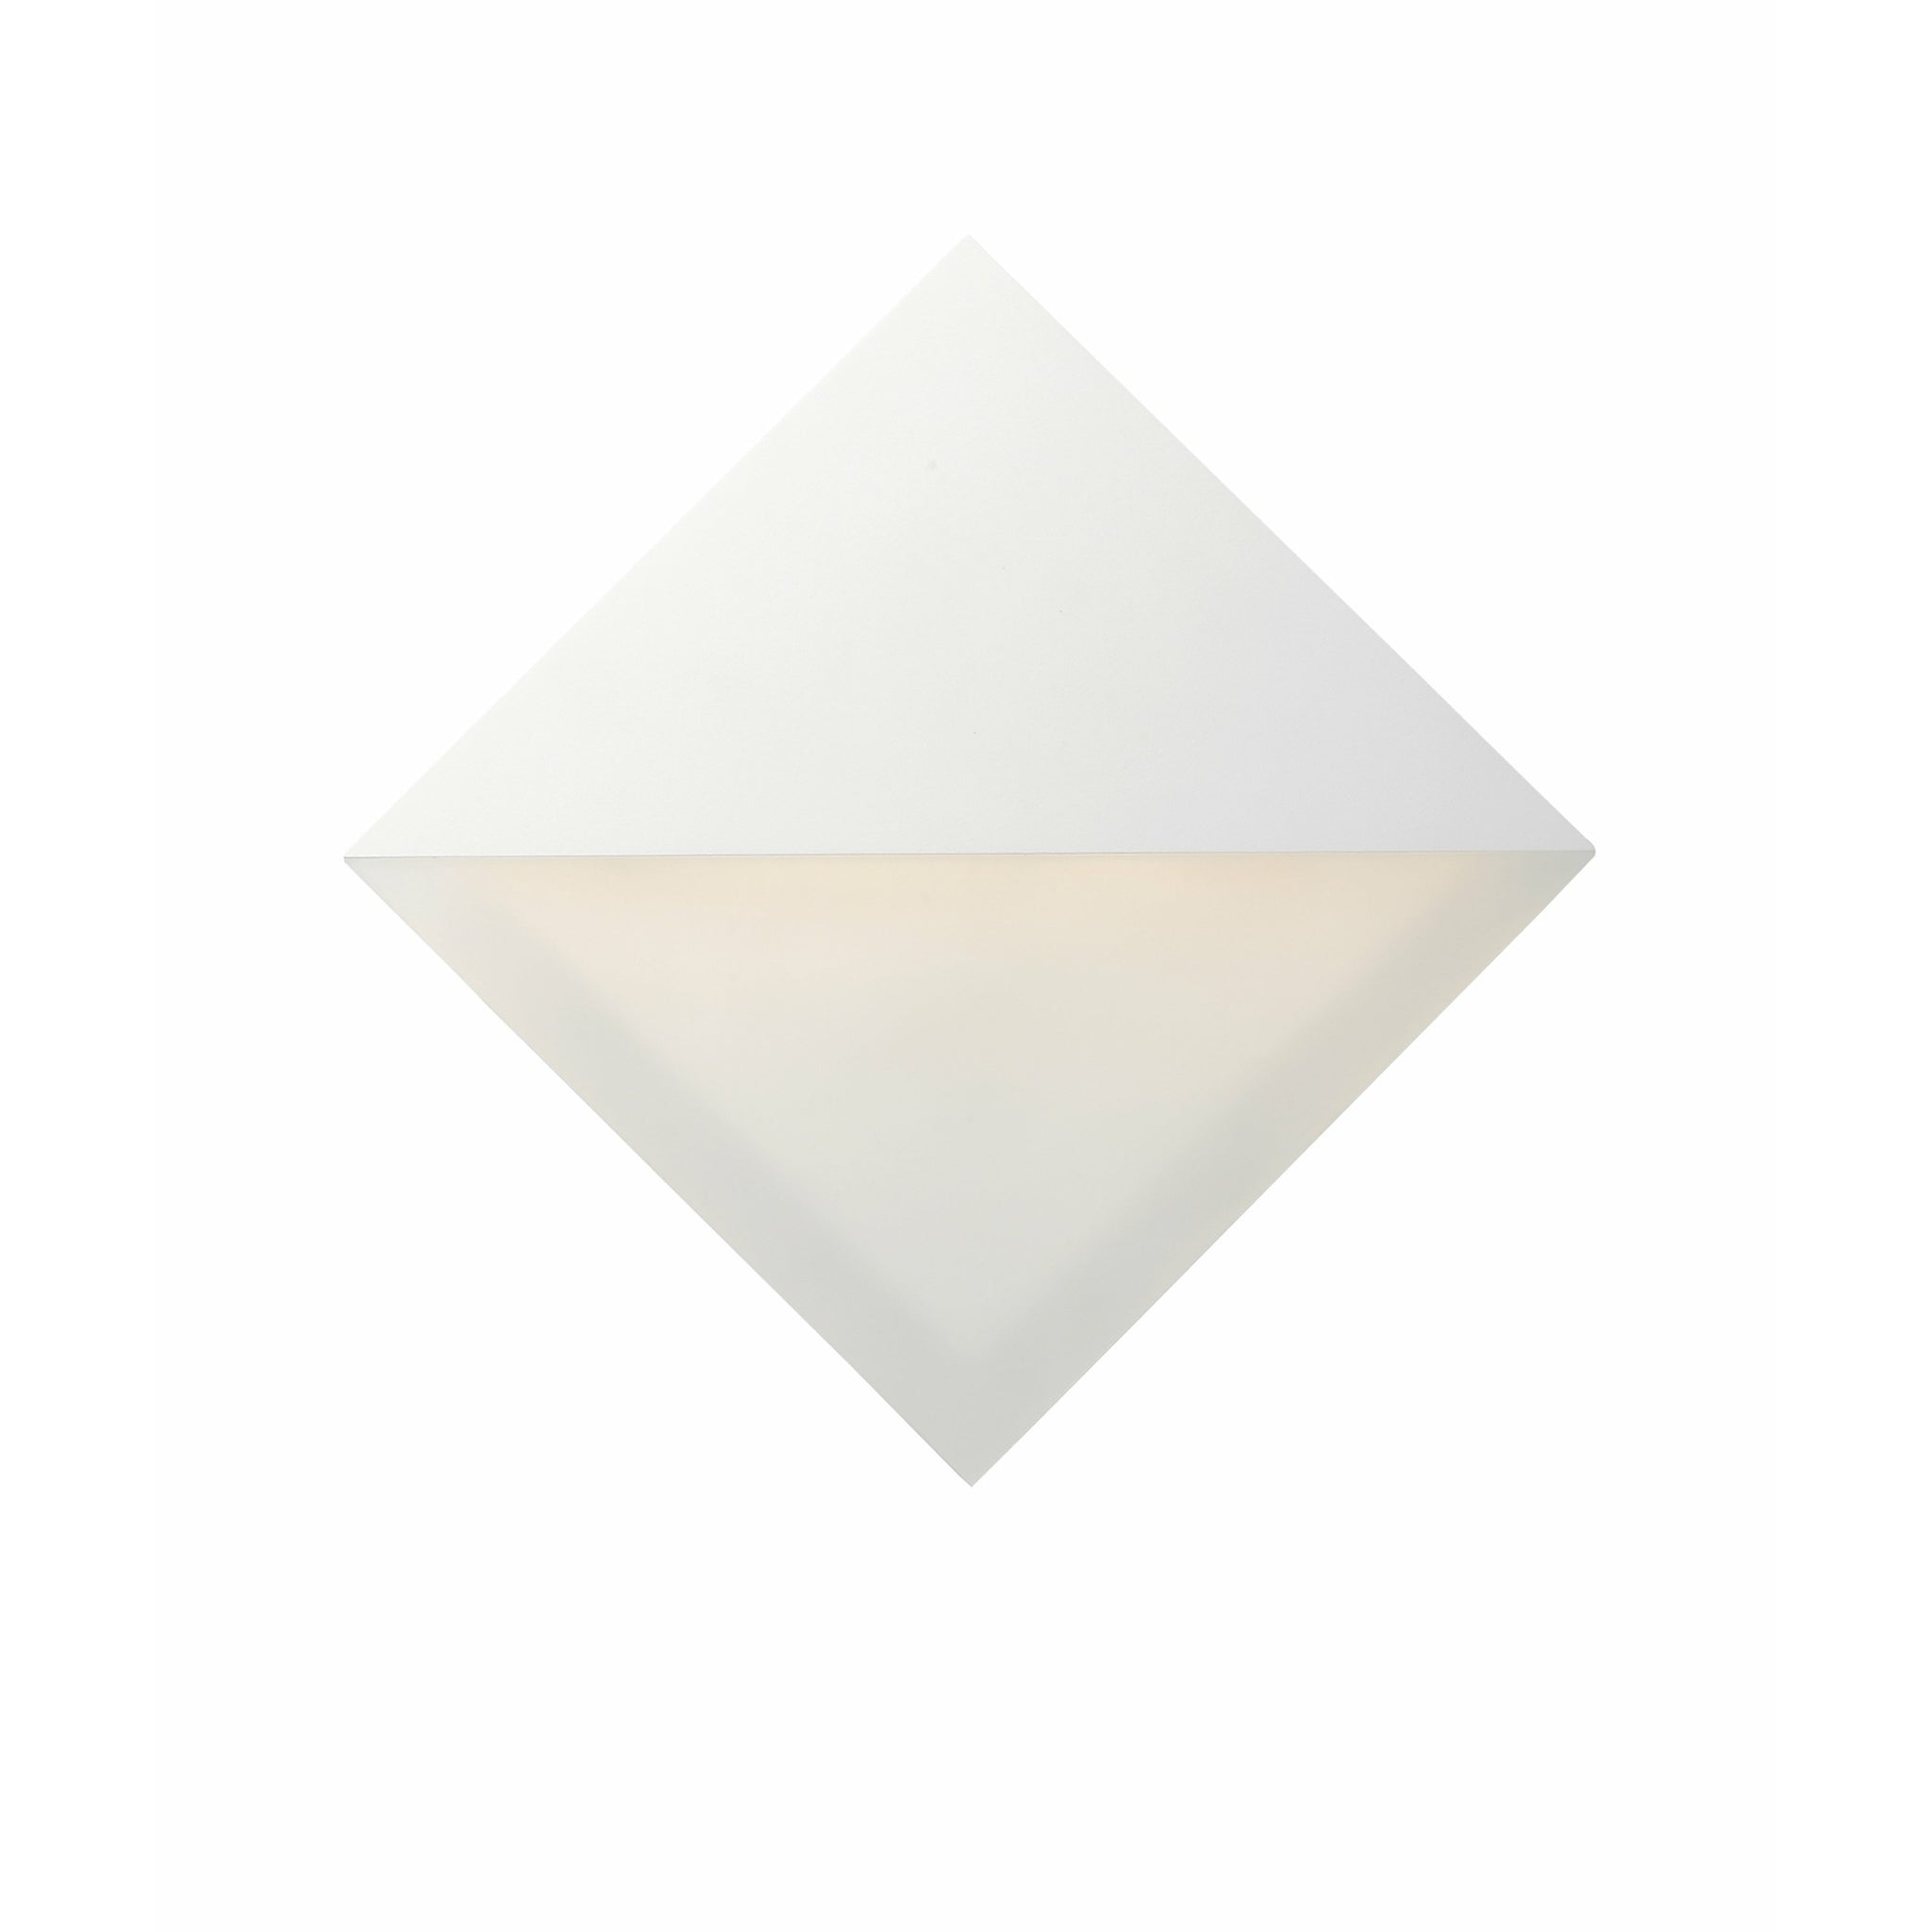 Alumilux Glow Outdoor Wall Light White